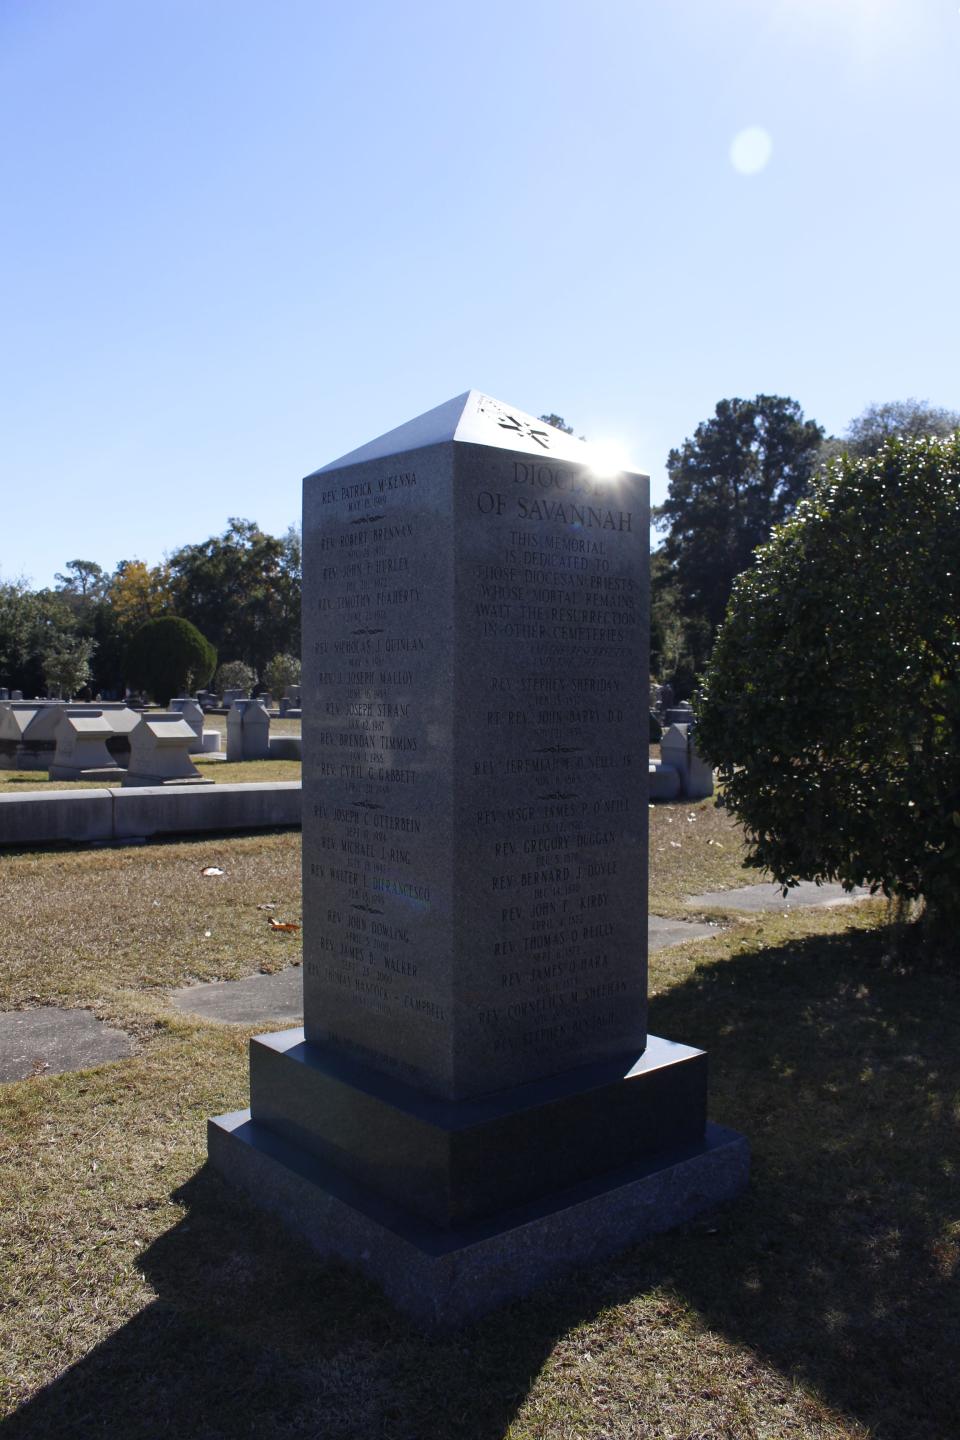 The obelisk in the Catholic Cemetery bears the names of deceased priests and bishops of the Diocese of Savannah buried in other graves.